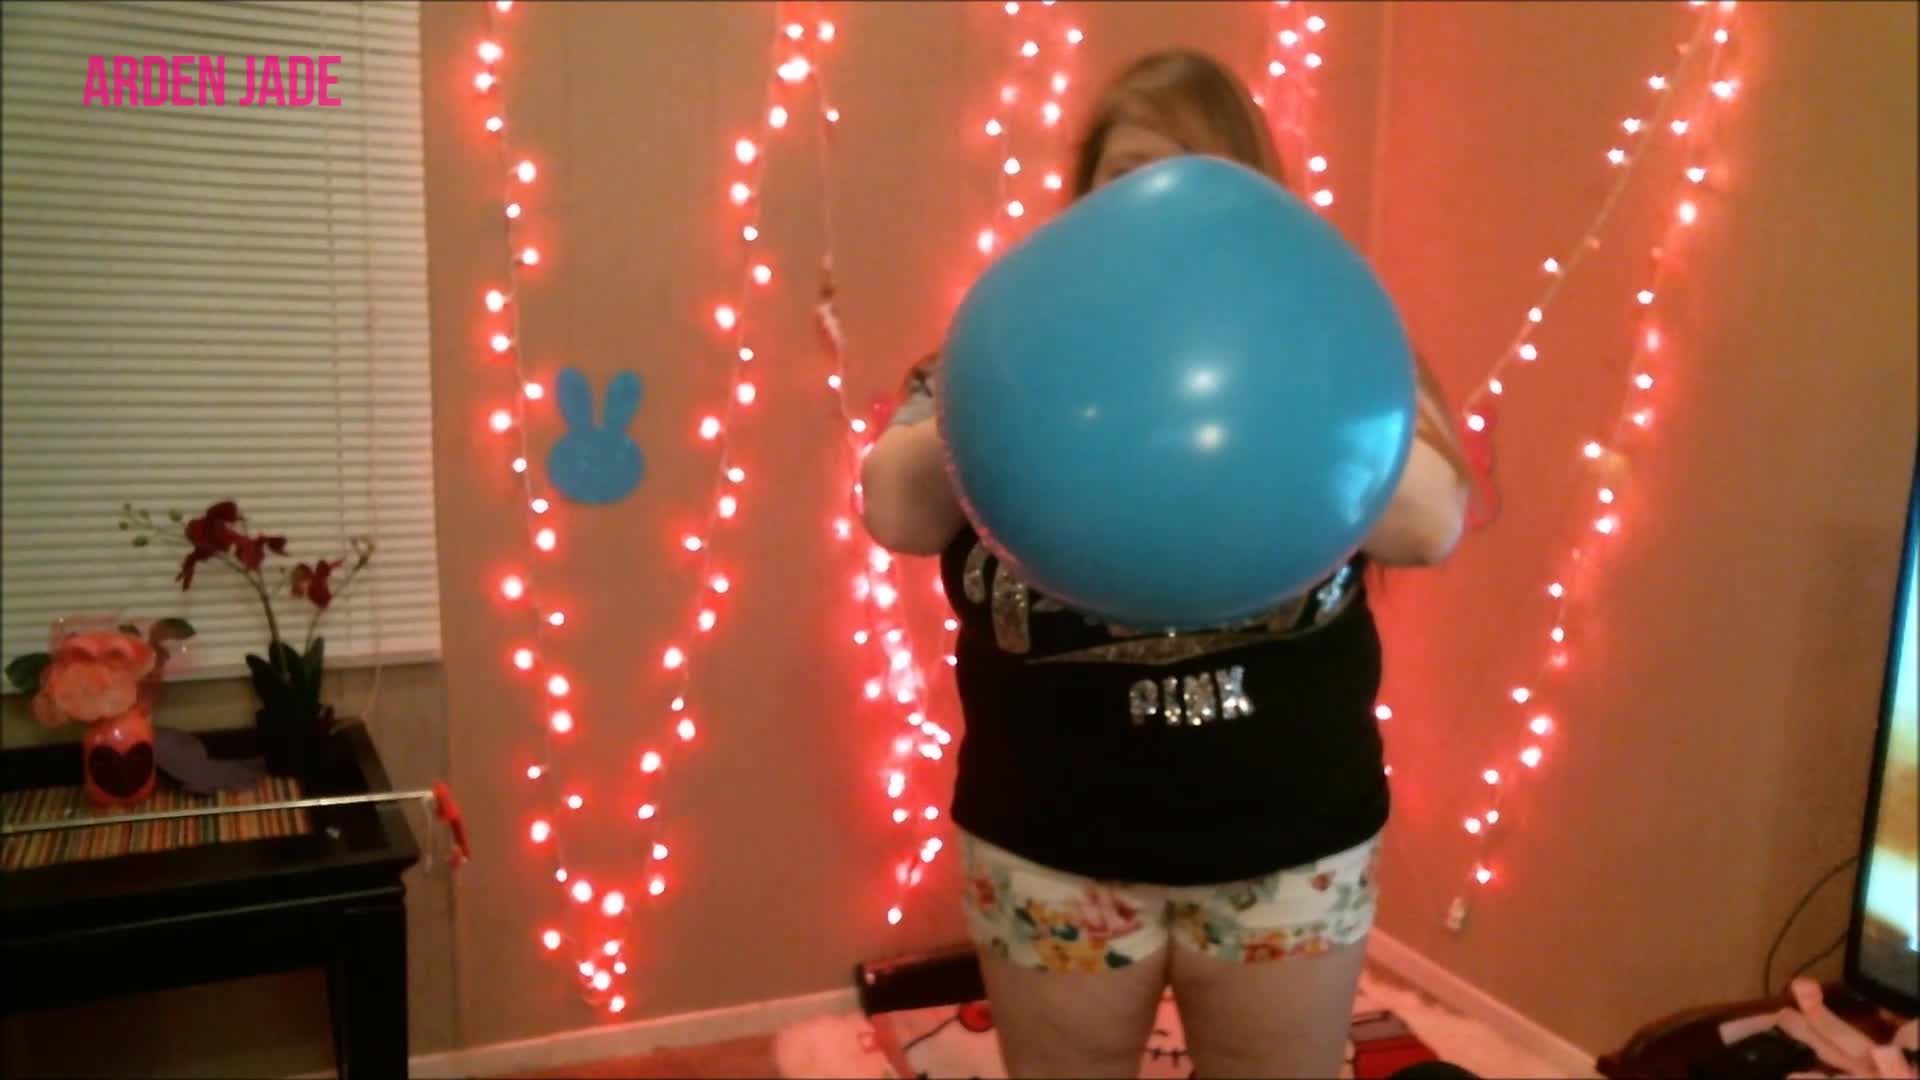 Blowing up a big blue balloon